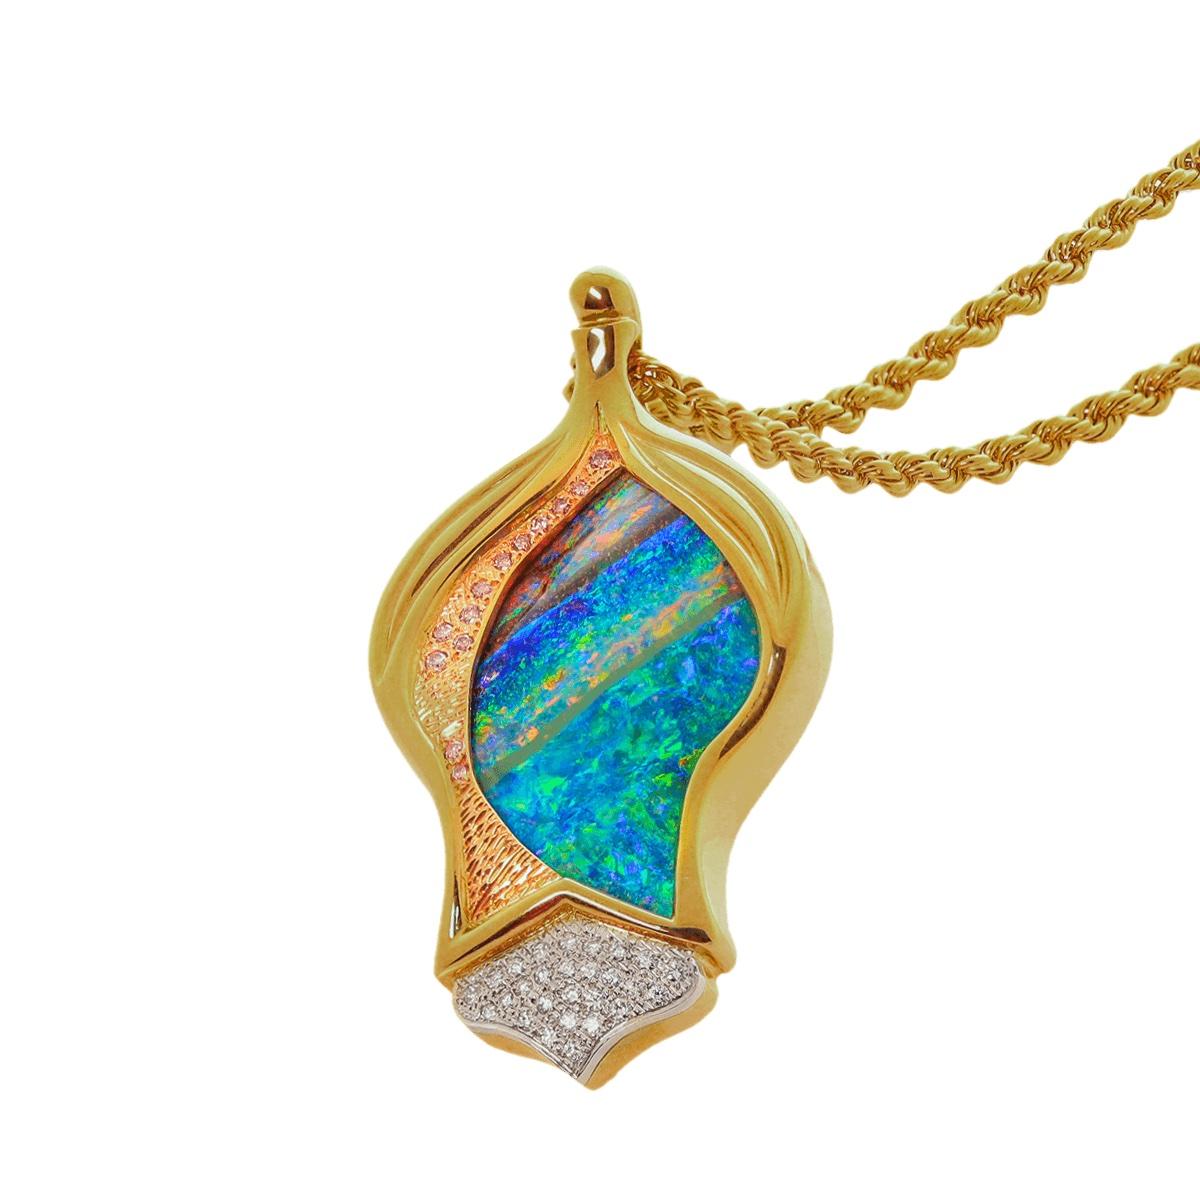 What a stunning pendant, this piece represents Australia’s magnificent gemstones like no other. With its truly amazing Black Boulder Opal of over 50ct from the Queensland outback, to its Pink and Brilliant White Diamonds from the Argyle diamond